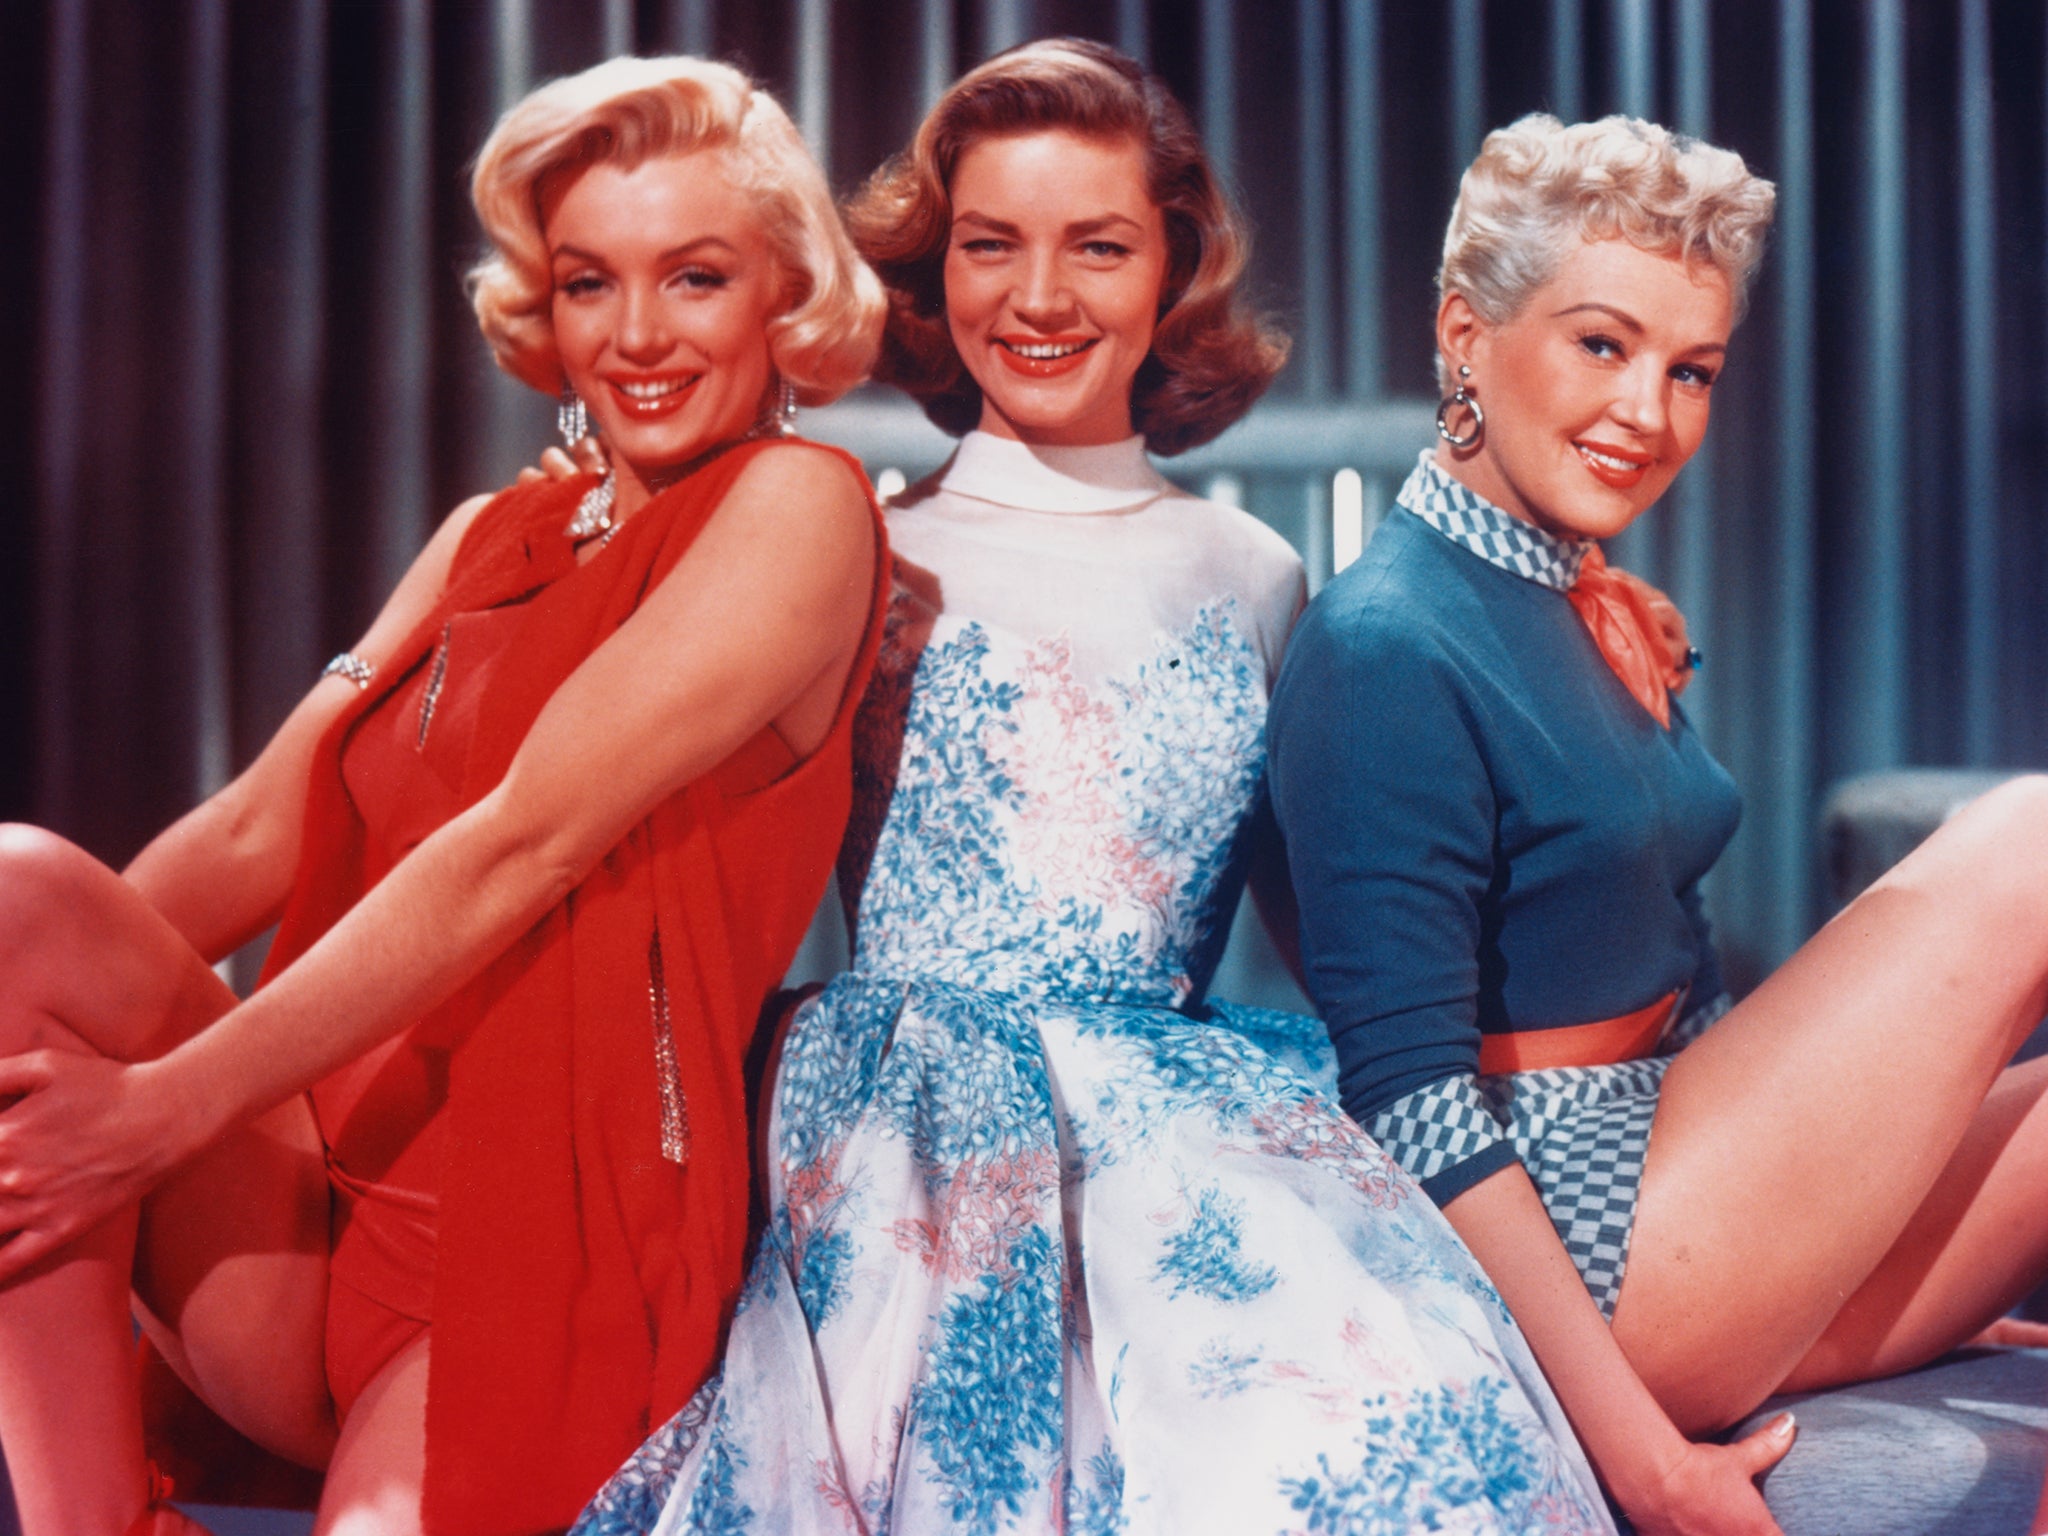 American actresses (L to R) Marilyn Monroe, Lauren Bacall and Betty Grable in a promotional portrait for 'How To Marry A Millionaire', directed by Jean Negulesco, 1953